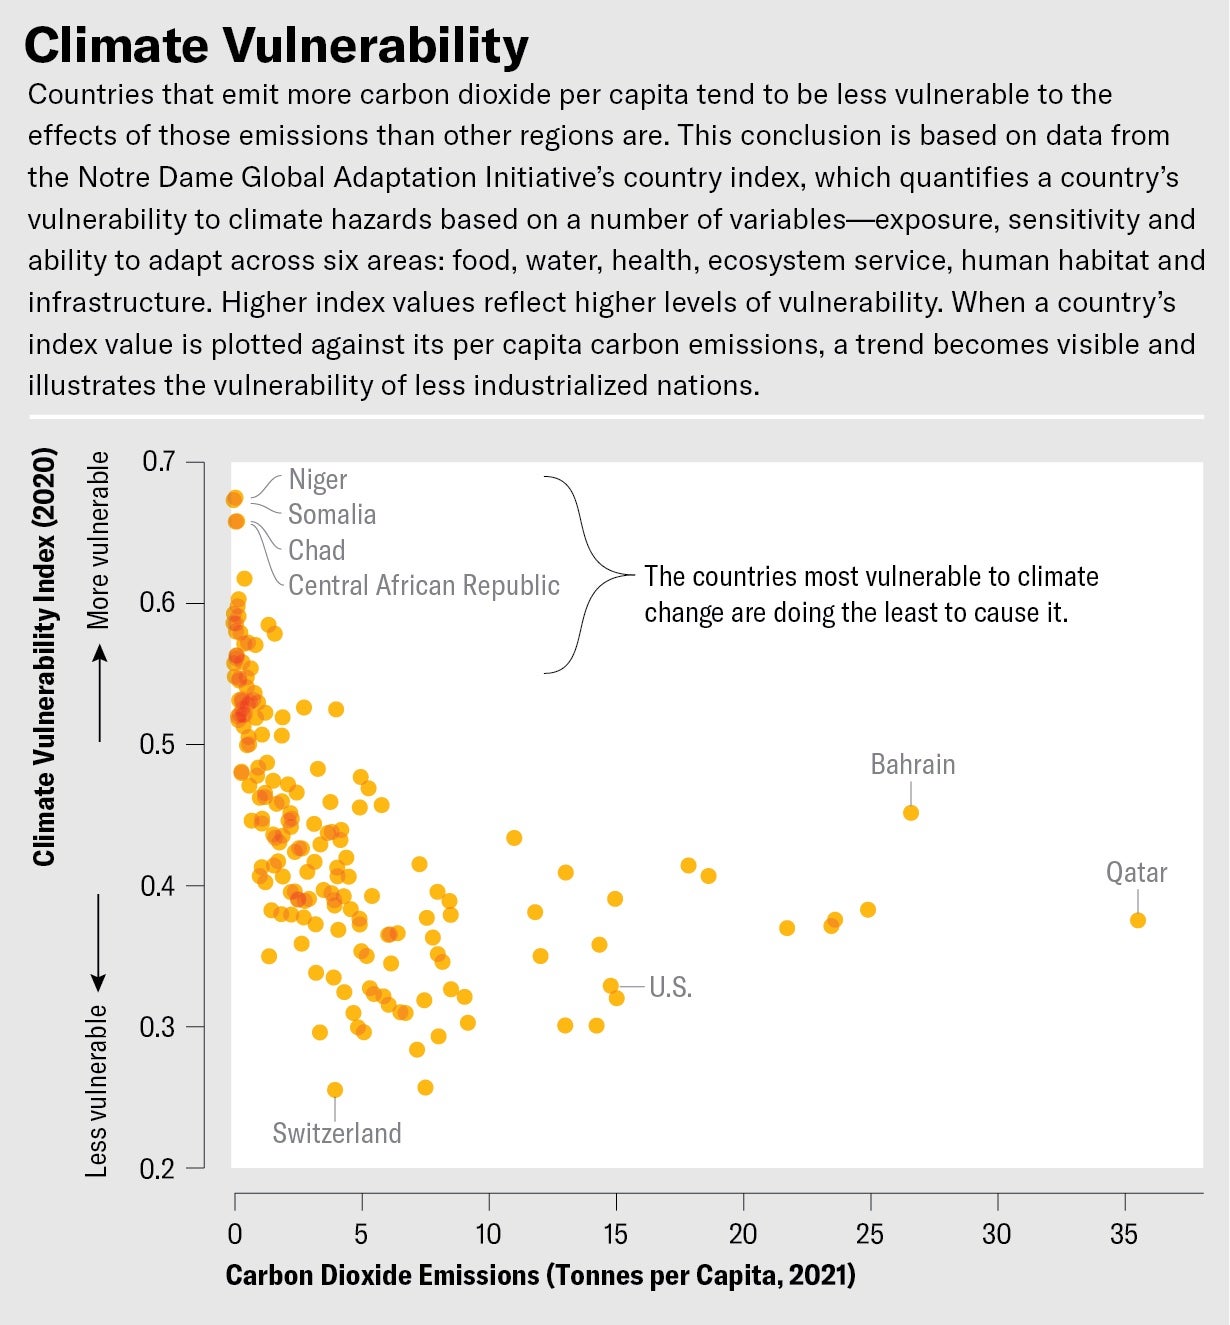 A scatterplot of climate vulnerability index values plotted against carbon emissions shows that countries that emit more carbon dioxide per capita tend to be less vulnerable to the effects of those emissions than other regions.